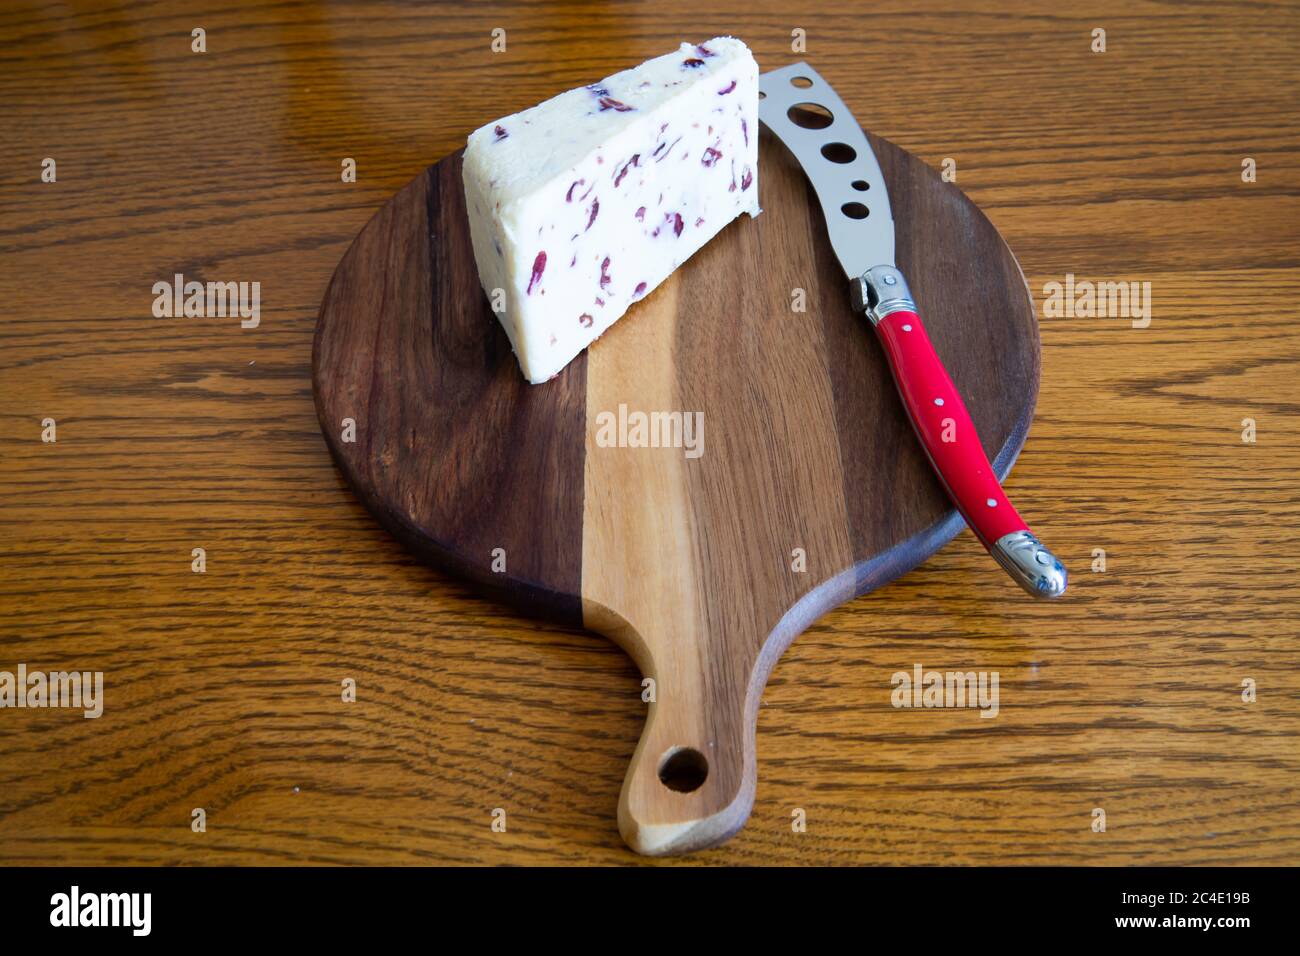 Wensleydale and Cranberry Cheese on a wooden cheeseboard with a red cheese knife Stock Photo